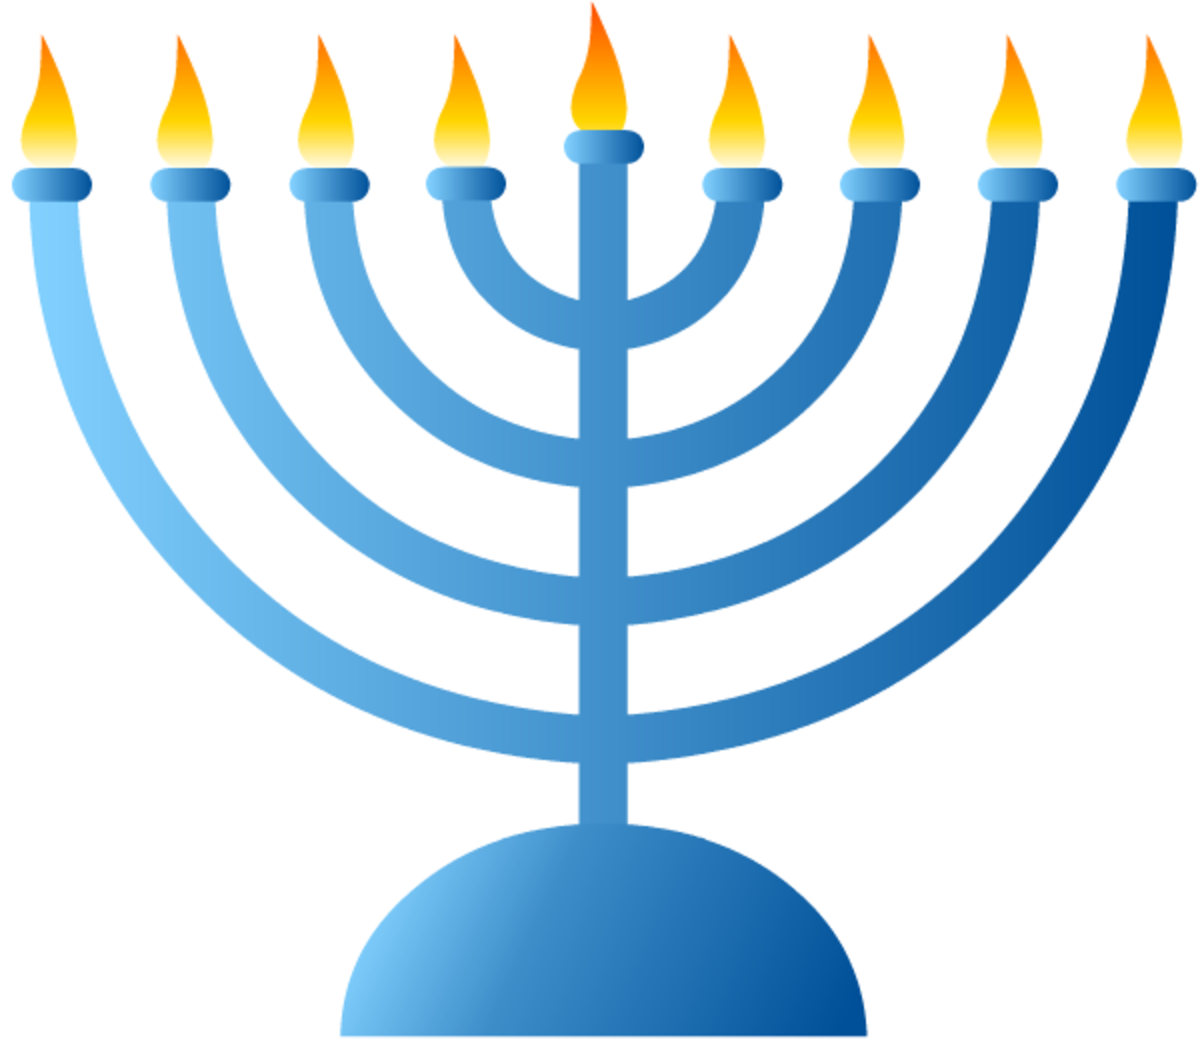 Please scroll down to see artwork to make your own Hanukkah (or Chanukah, if you prefer) cards